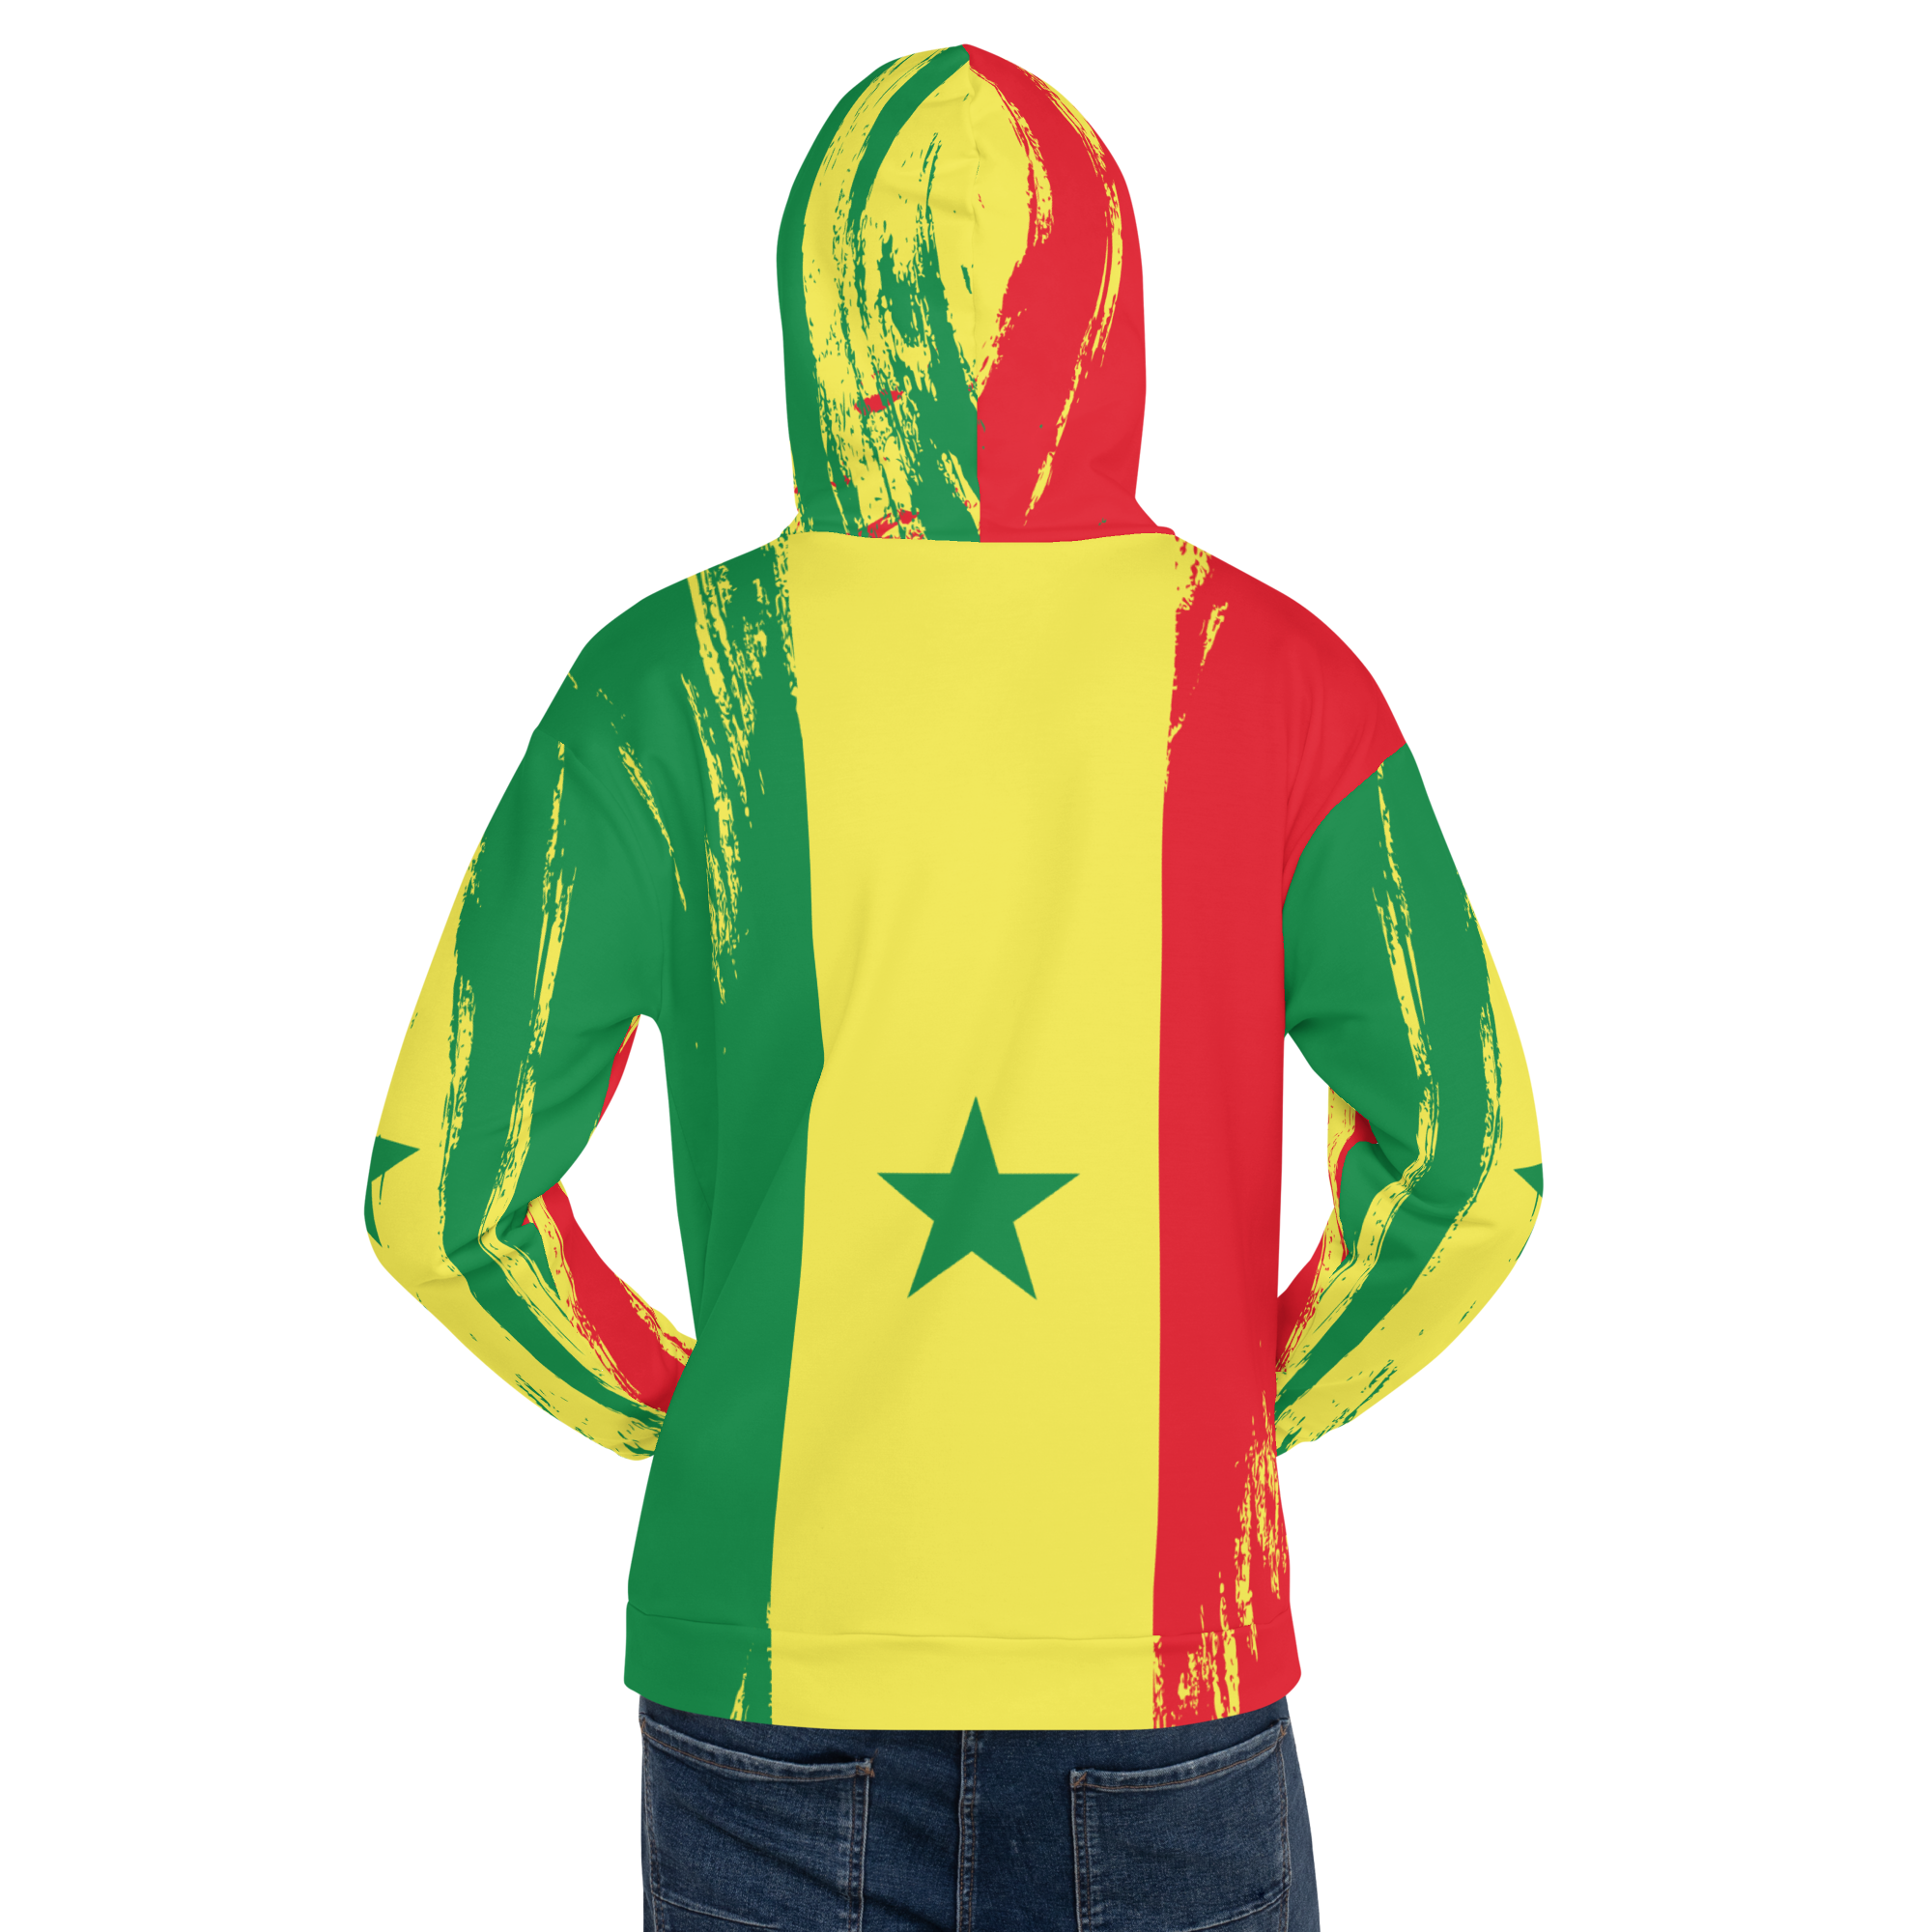 My colorful Senegal flag inspired unisex oversized volleyball team hoodies by Volleybragswag are now sold on ETSY!